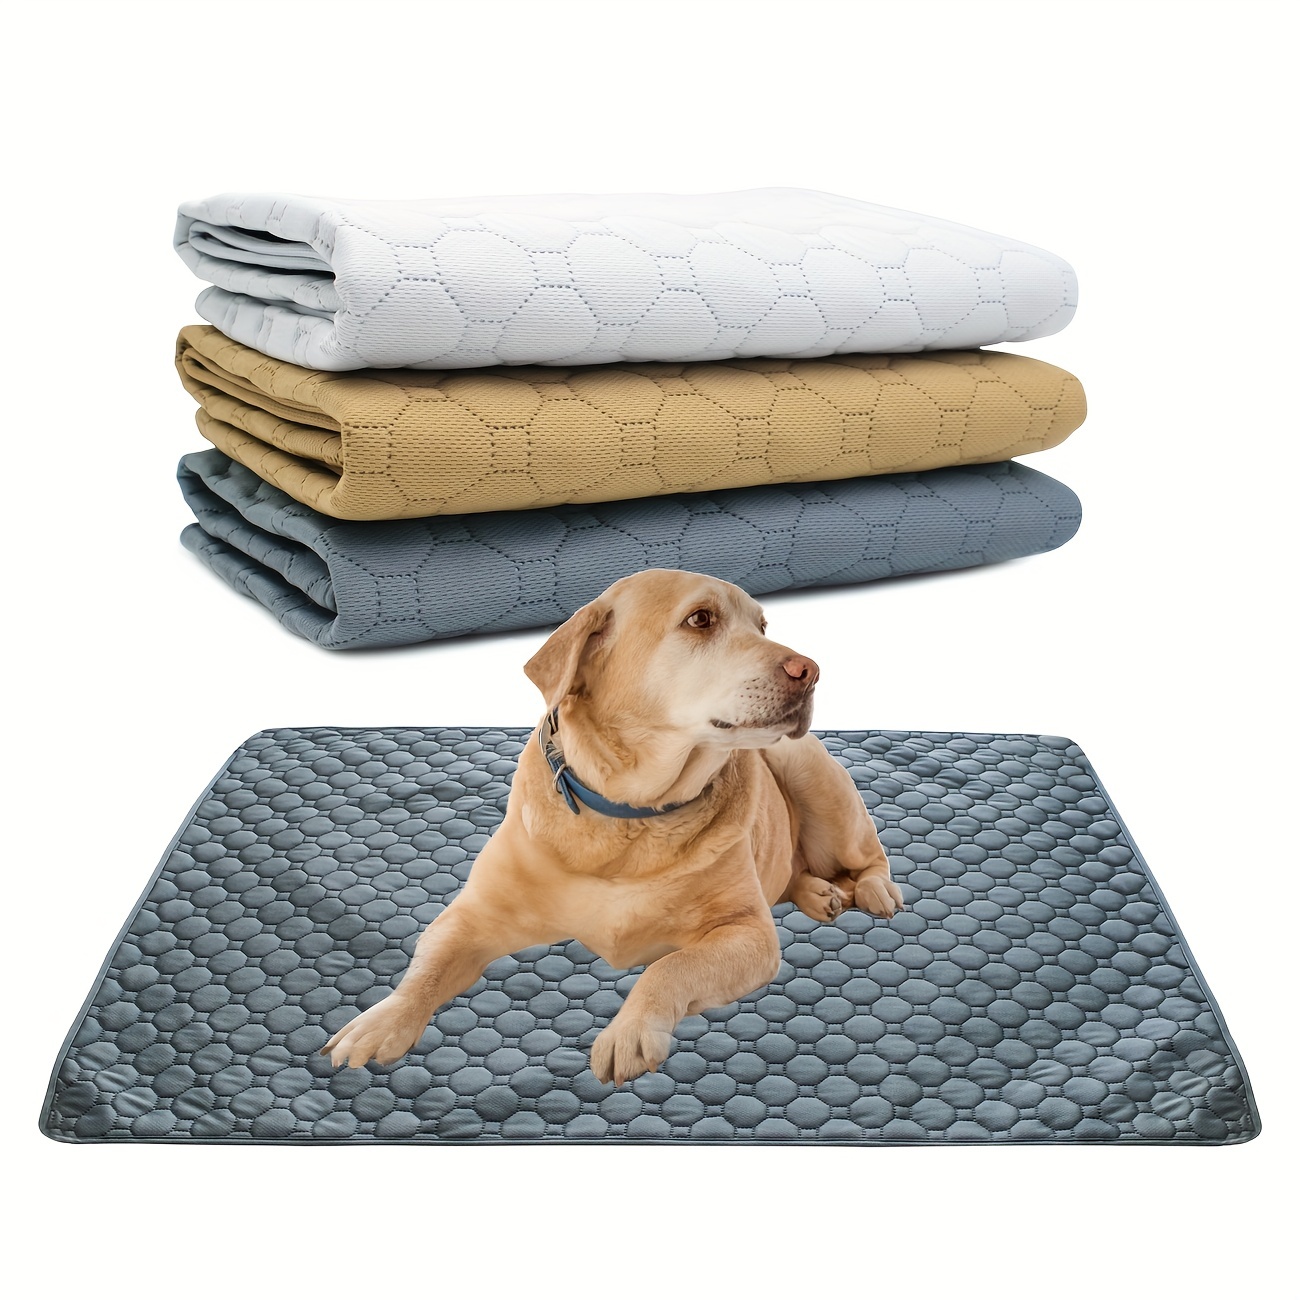 GREEN LIFESTYLE Washable Underpads - Large Bed Pads for use as Incontinence  Bed Pads, Reusable Pet Pads, Great for Dogs, Cats, Bunny, Seniors Bed Pad